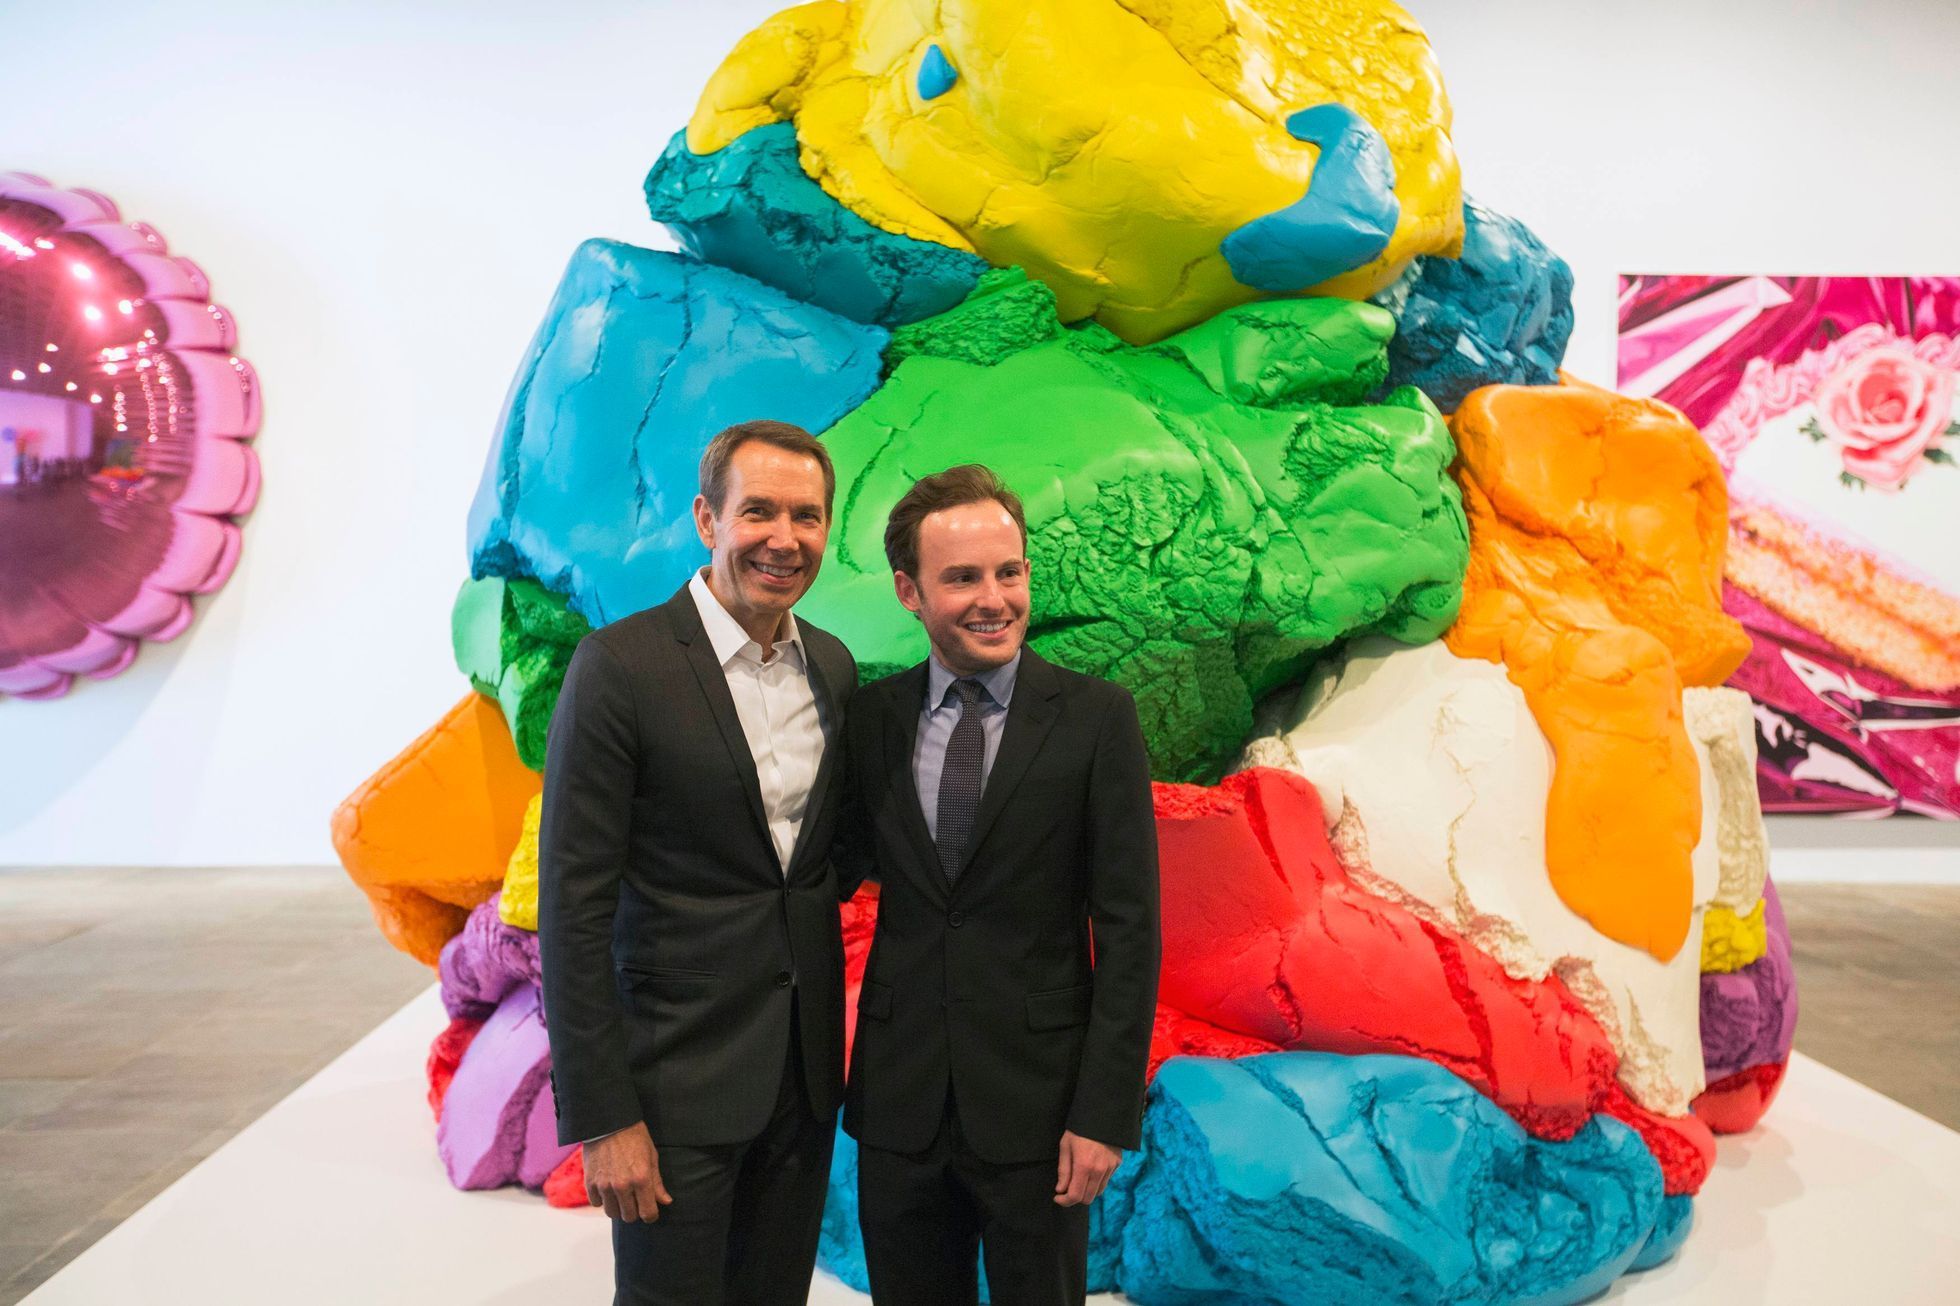 Artist Jeff Koons poses with Scott Rothkopf, the associate director of programs at the Whitney, during a press preview in New York